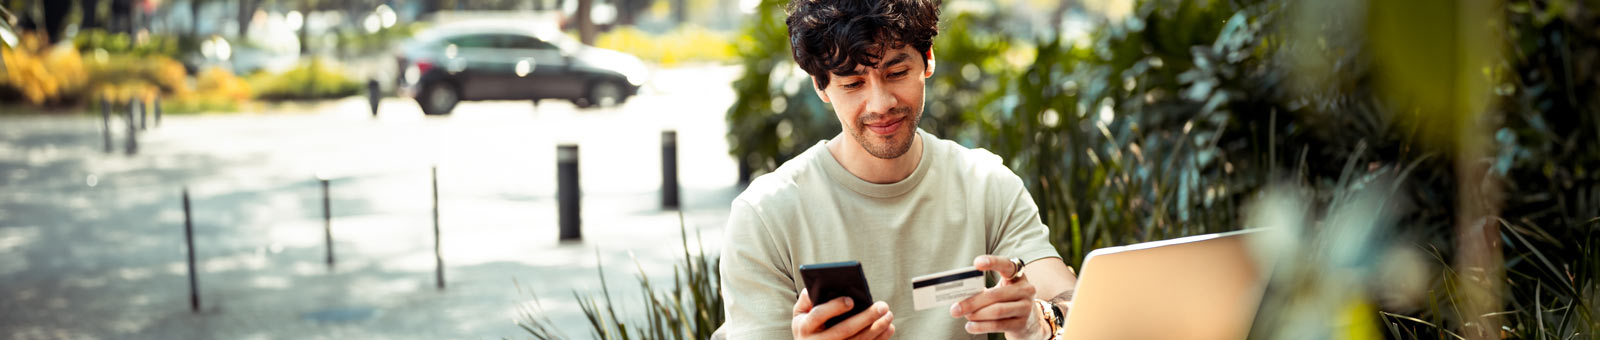 Man holding mobile phone in one hand and credit card in other